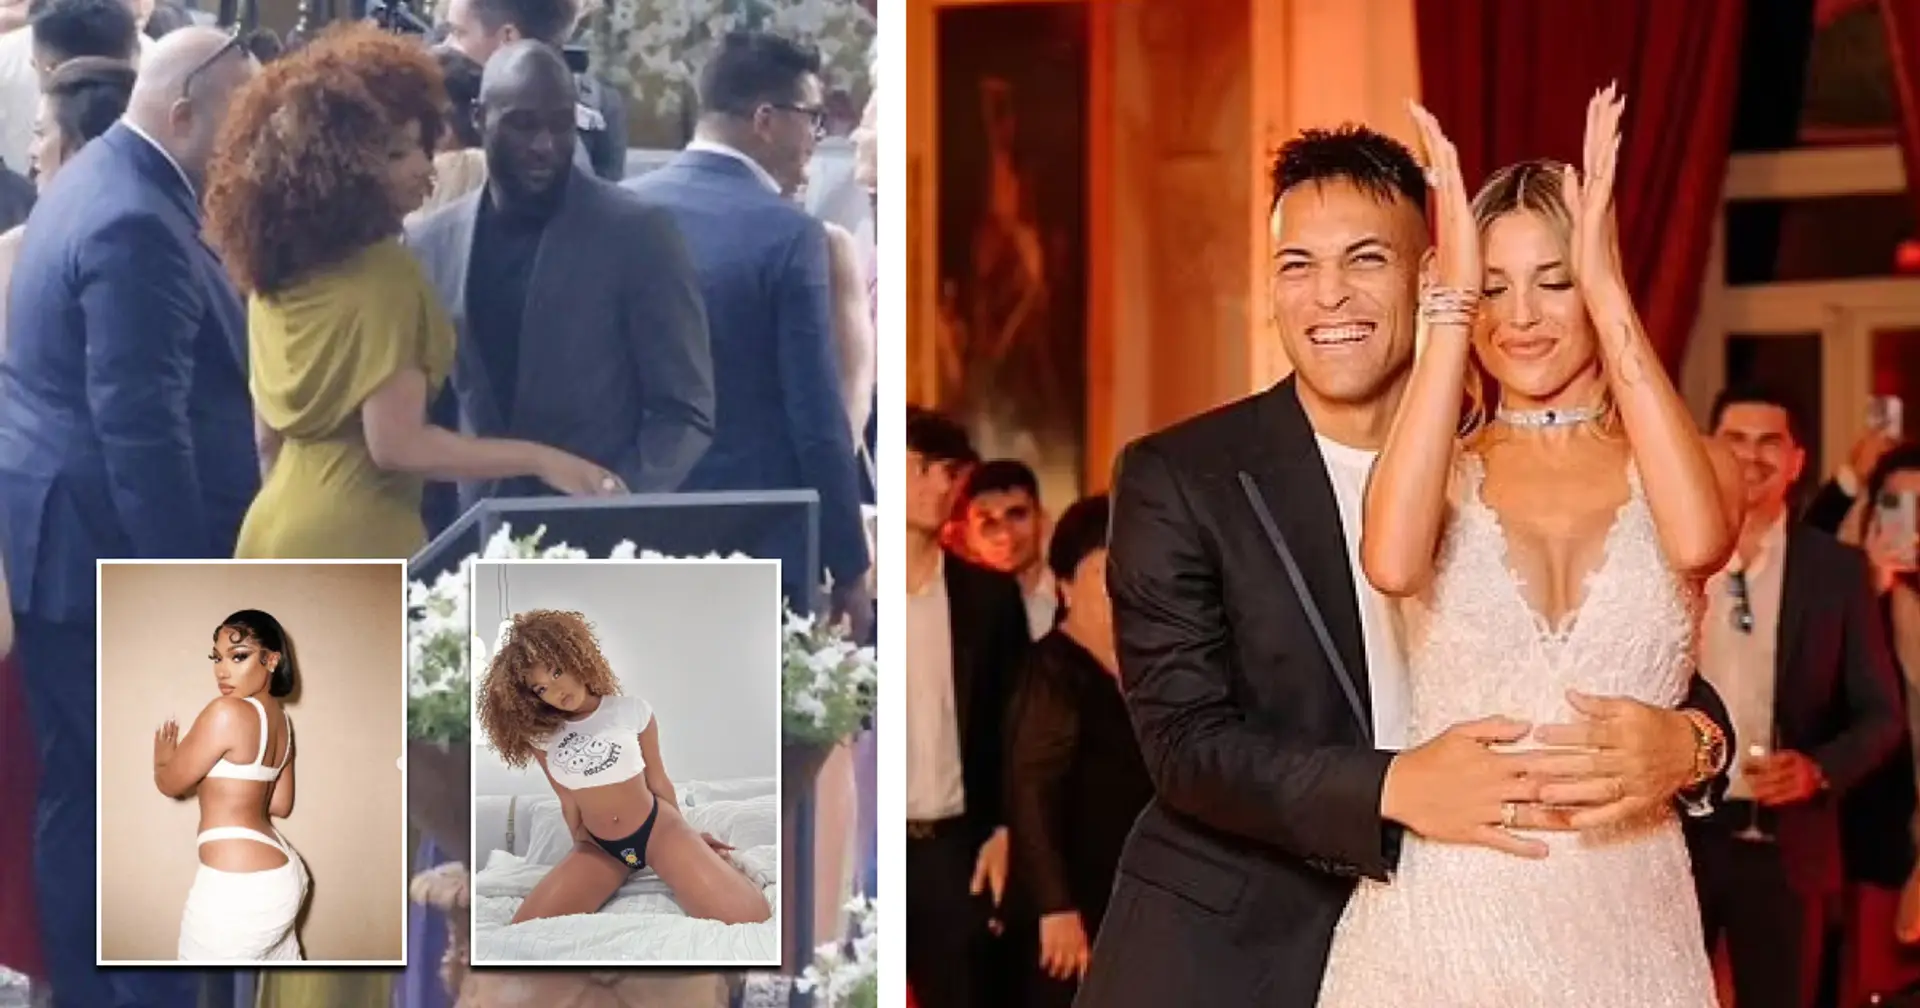 'And people say he lacks ambition': Lukaku spotted holding hands with Megan Thee Stallion at Lautaro's wedding